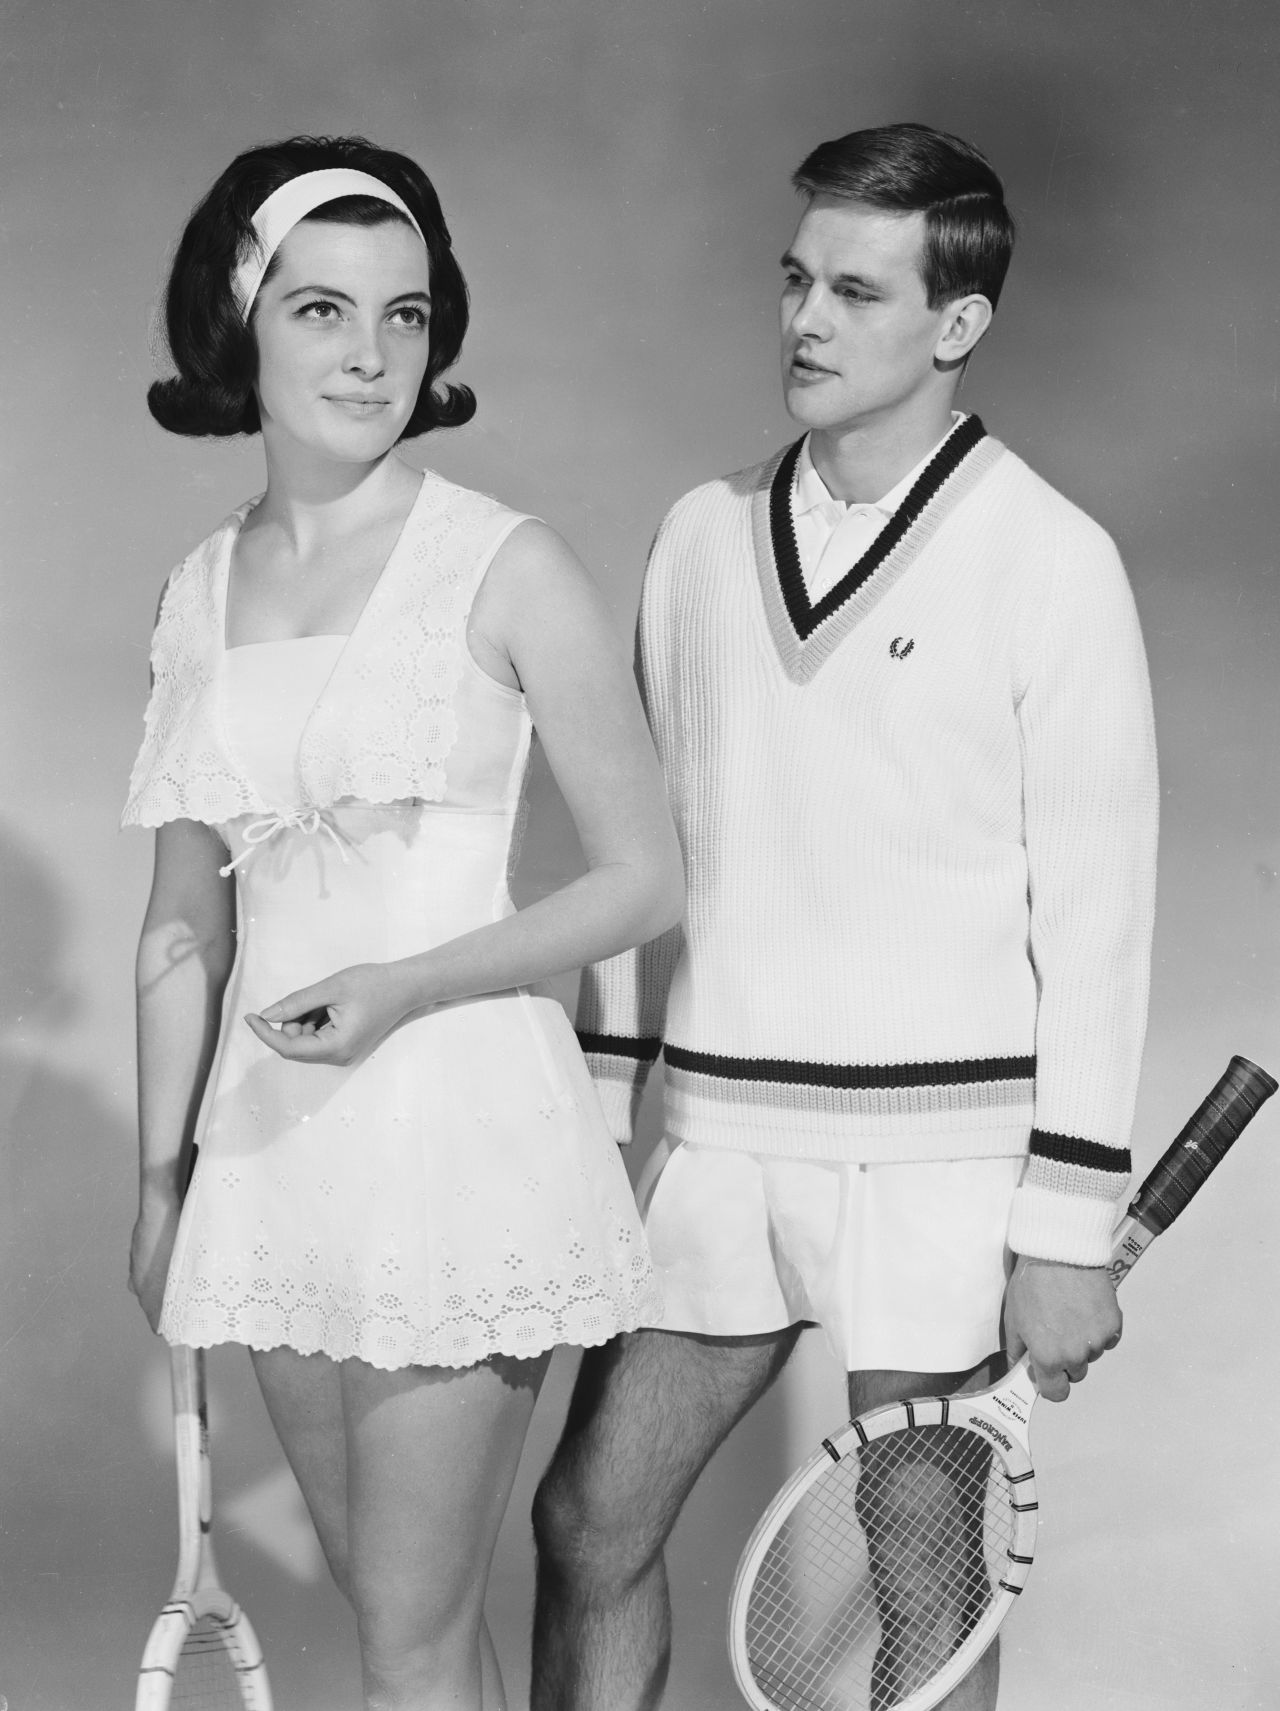 "You still see wooden tennis rackets showing up in clothing catalogs a fair amount today. It's become an iconic symbol of leisure, relaxation, wealth and elegance," says Rothenberg.<br />"You see models holding them over their shoulder with a sweater tied around their neck, and it's become a timeless, preppy prop."<br />Here, two models show off their stylish sports attire in 1964.